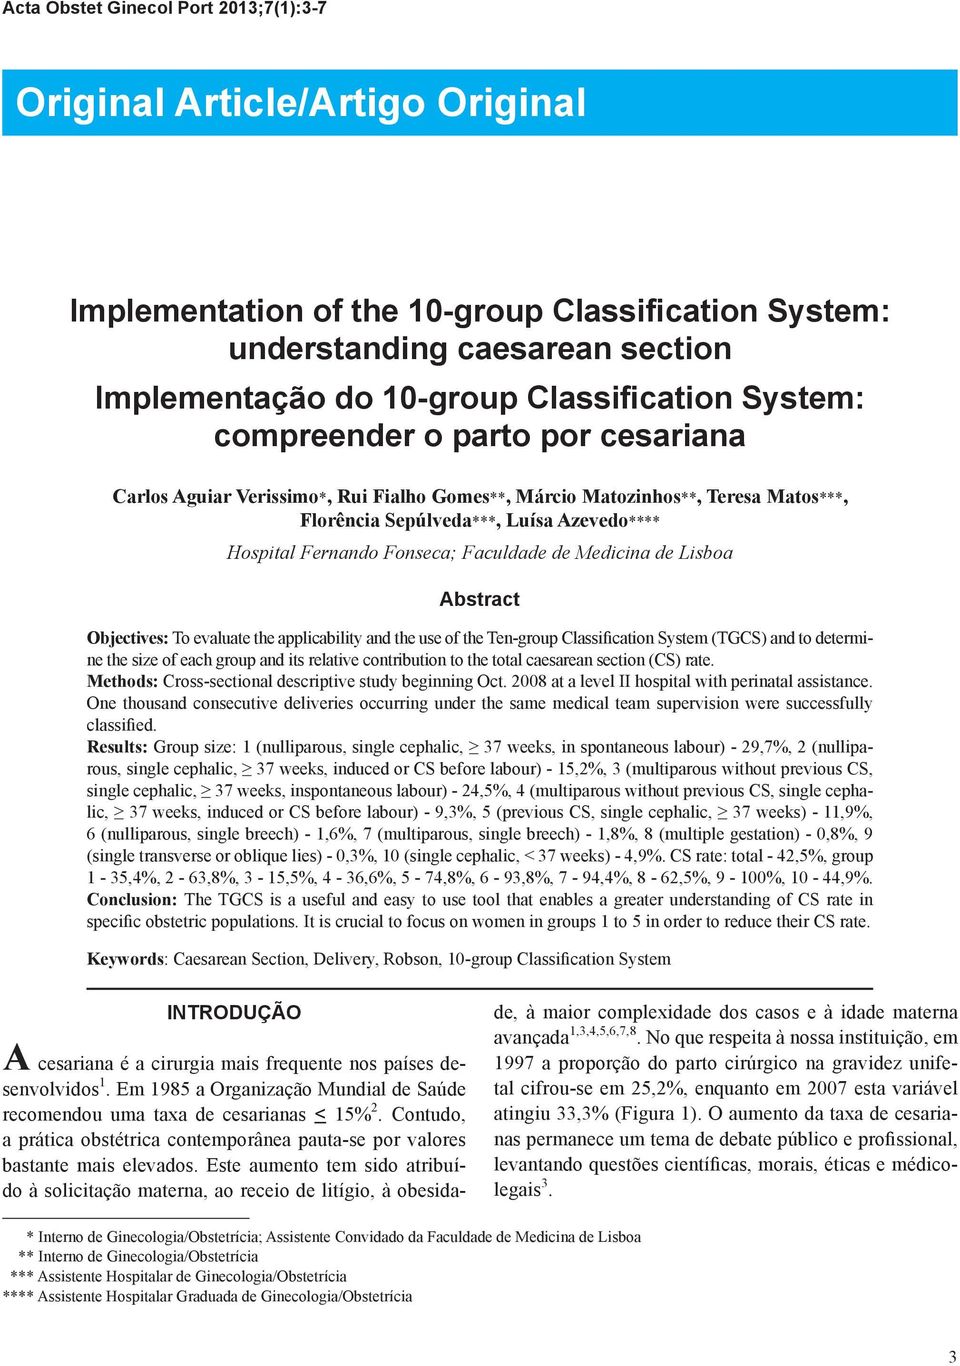 Objectives: To evaluate the applicability and the use of the Ten-group Classiication System (TGCS) and to determine the size of each group and its relative contribution to the total caesarean section